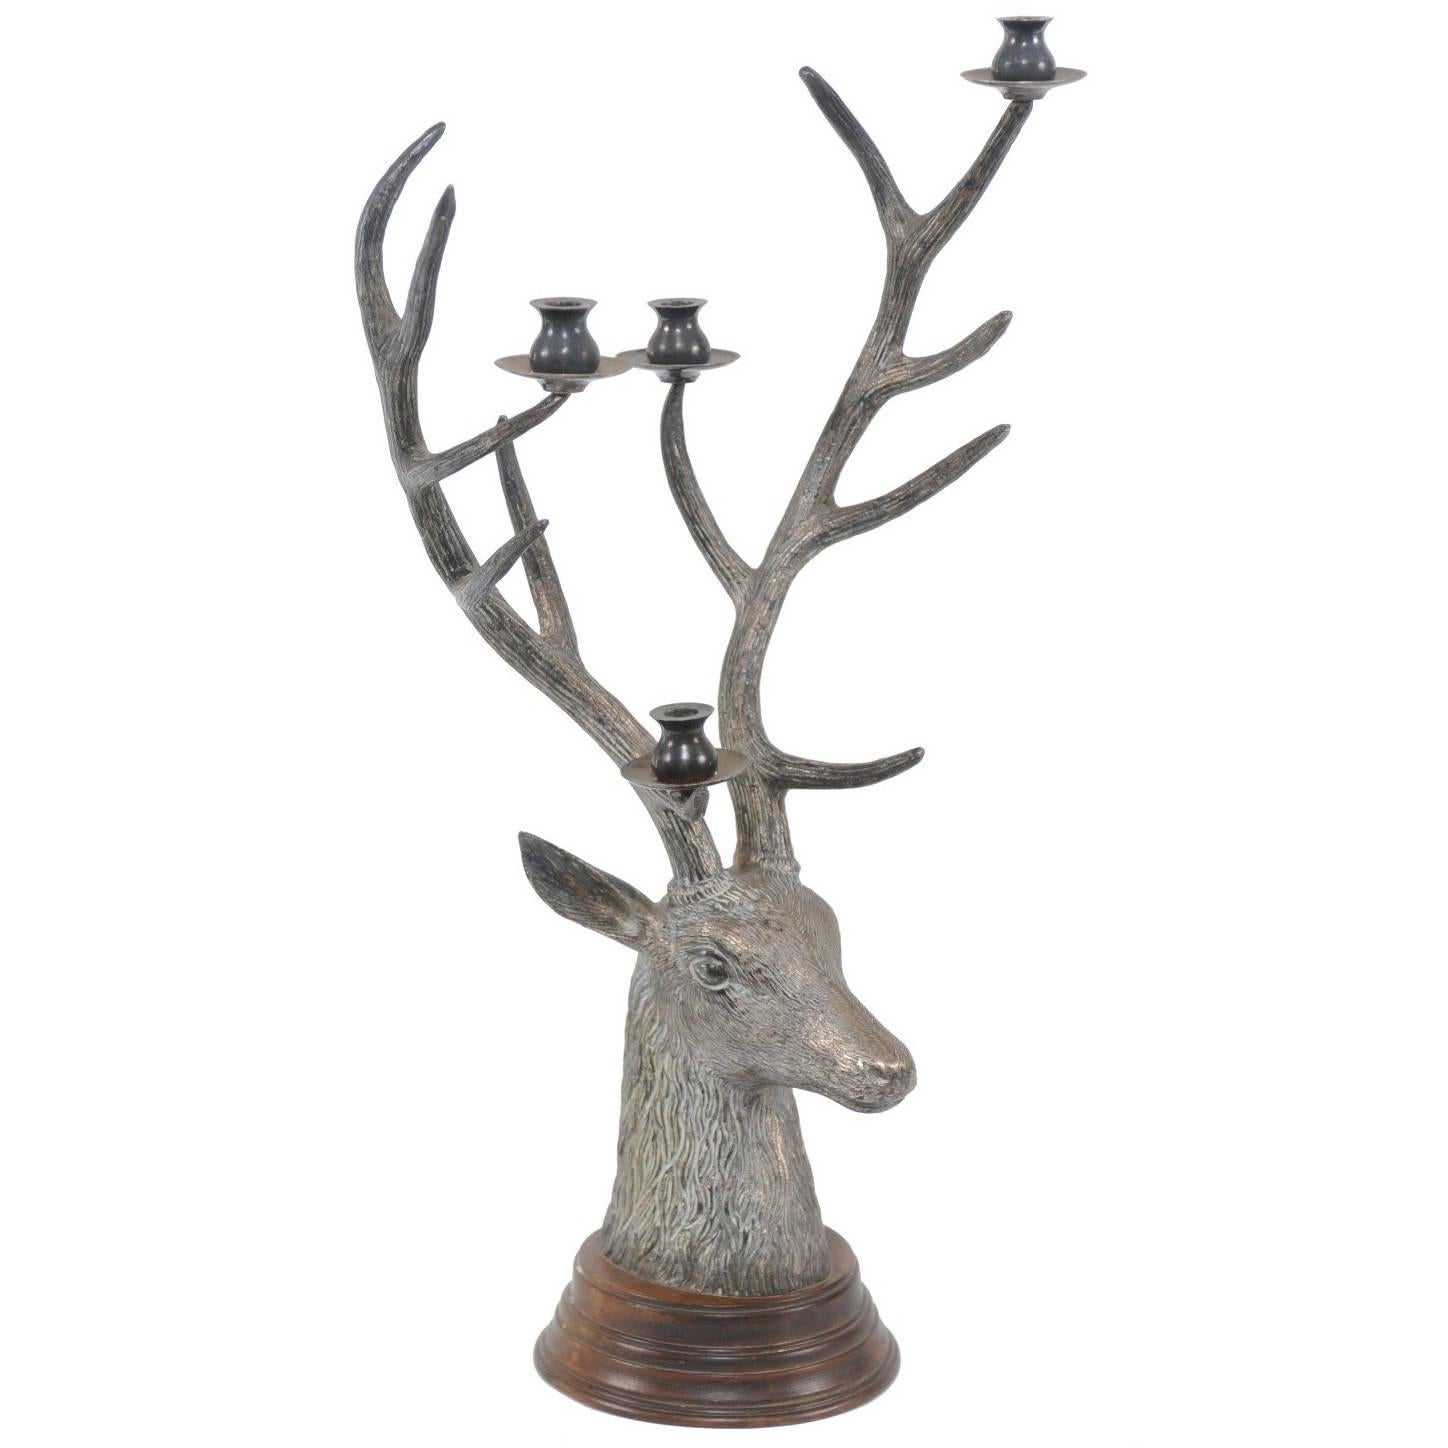 French Vintage Bronze Candelabra Depicting a Buck Head with Tall Antlers, 1950s